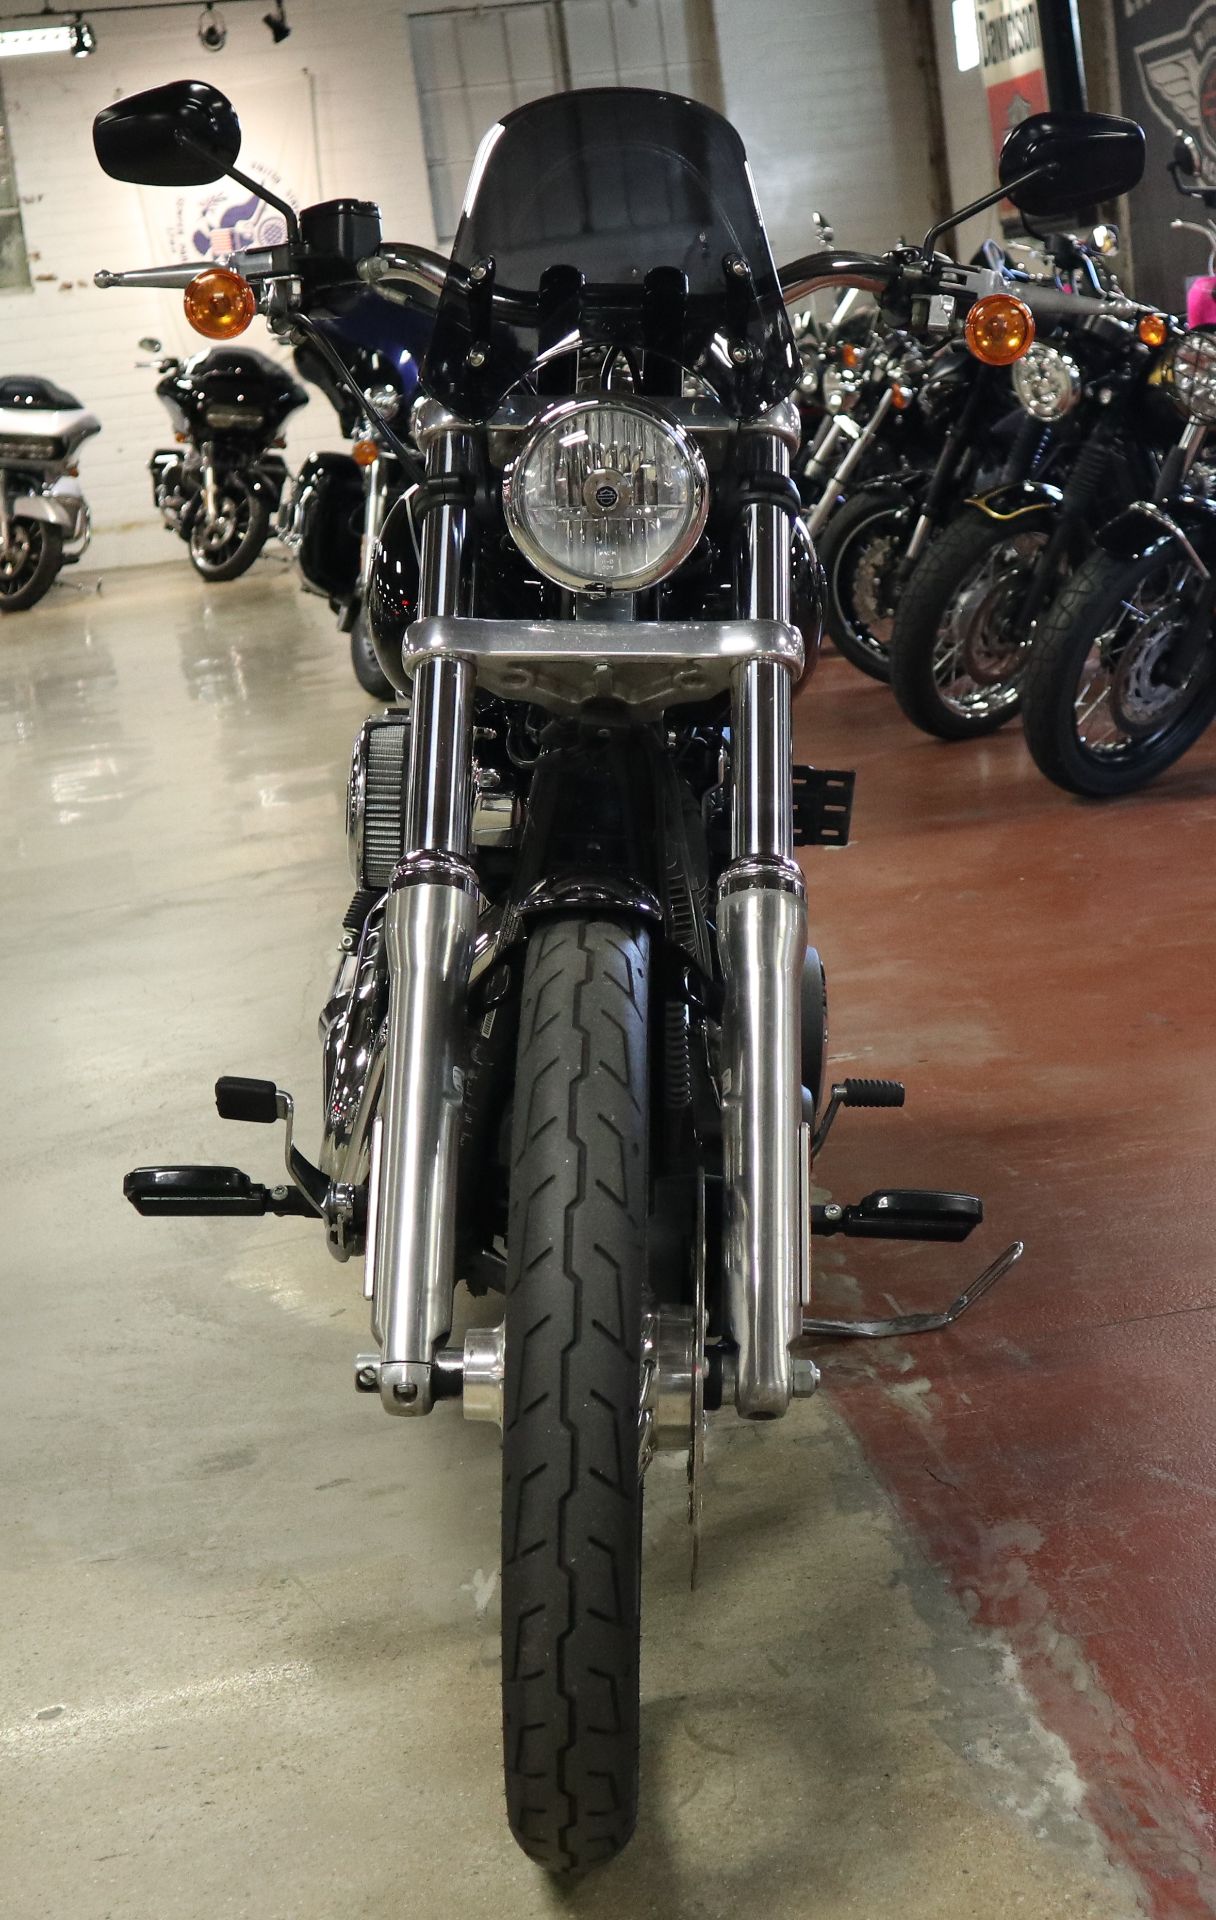 2017 Harley-Davidson Wide Glide in New London, Connecticut - Photo 3